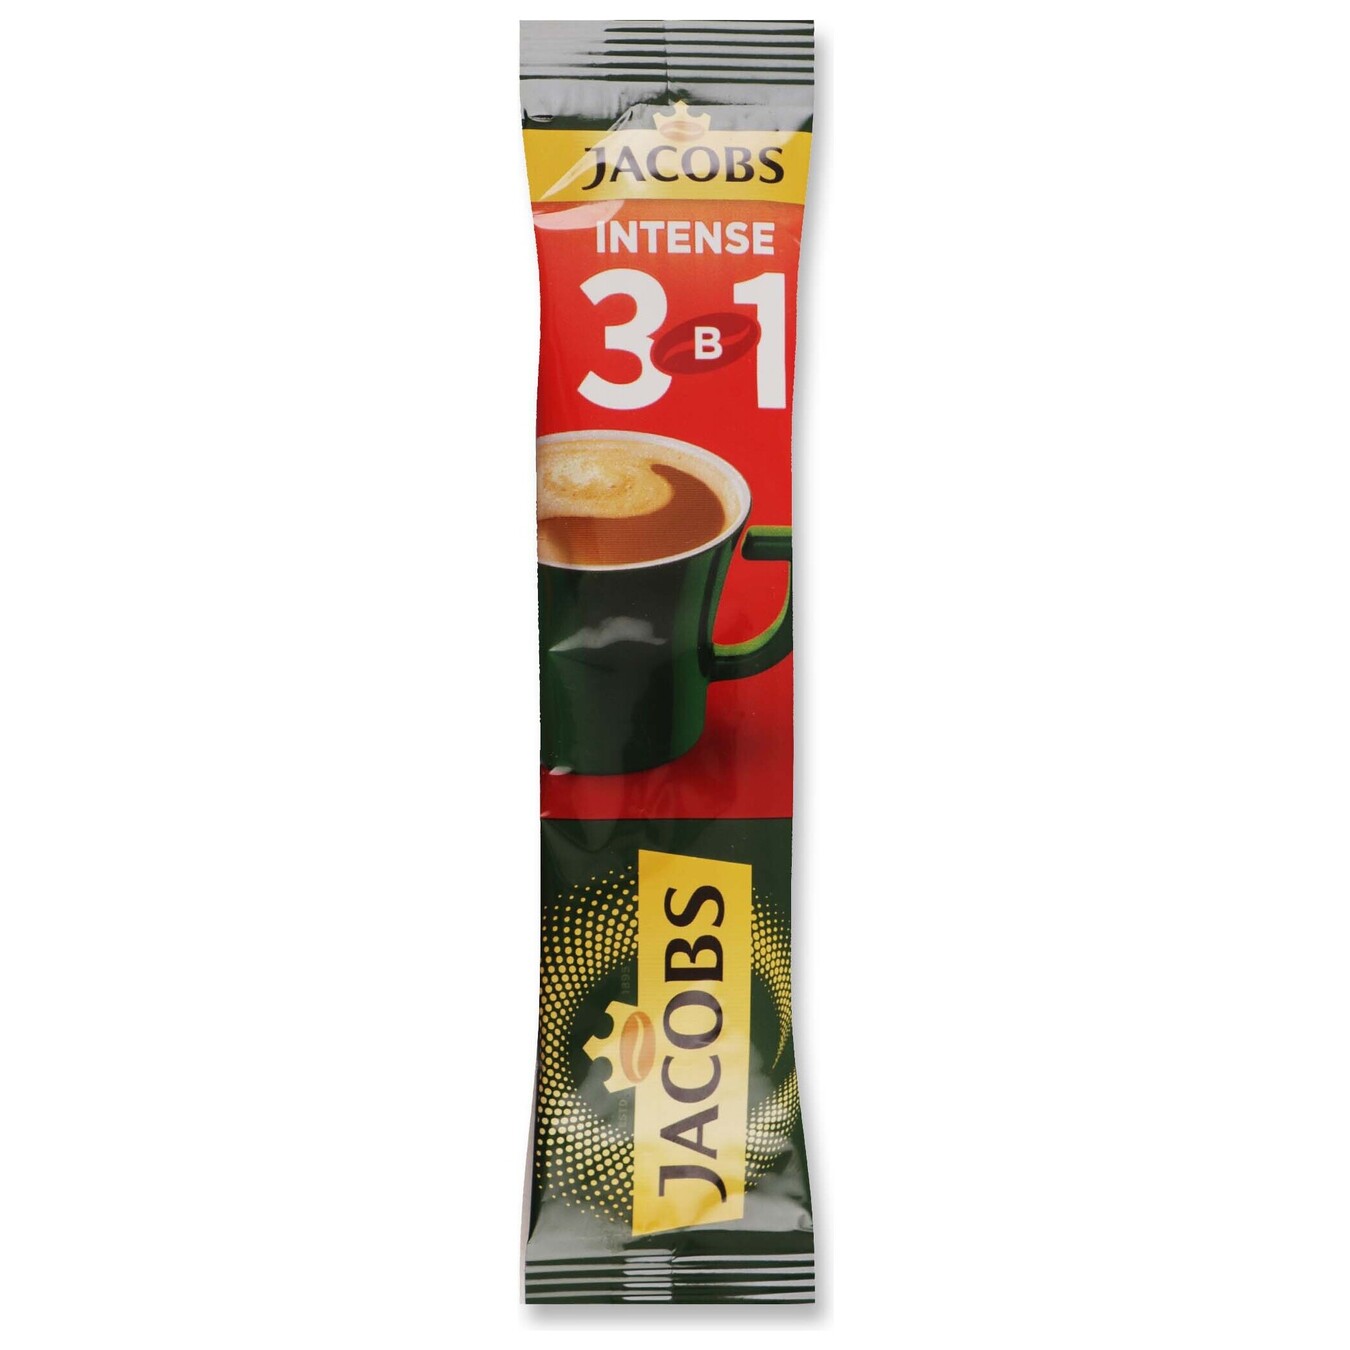 Jacobs instant coffee drink 3 in 1 Intense with sugar and sweeteners 12g